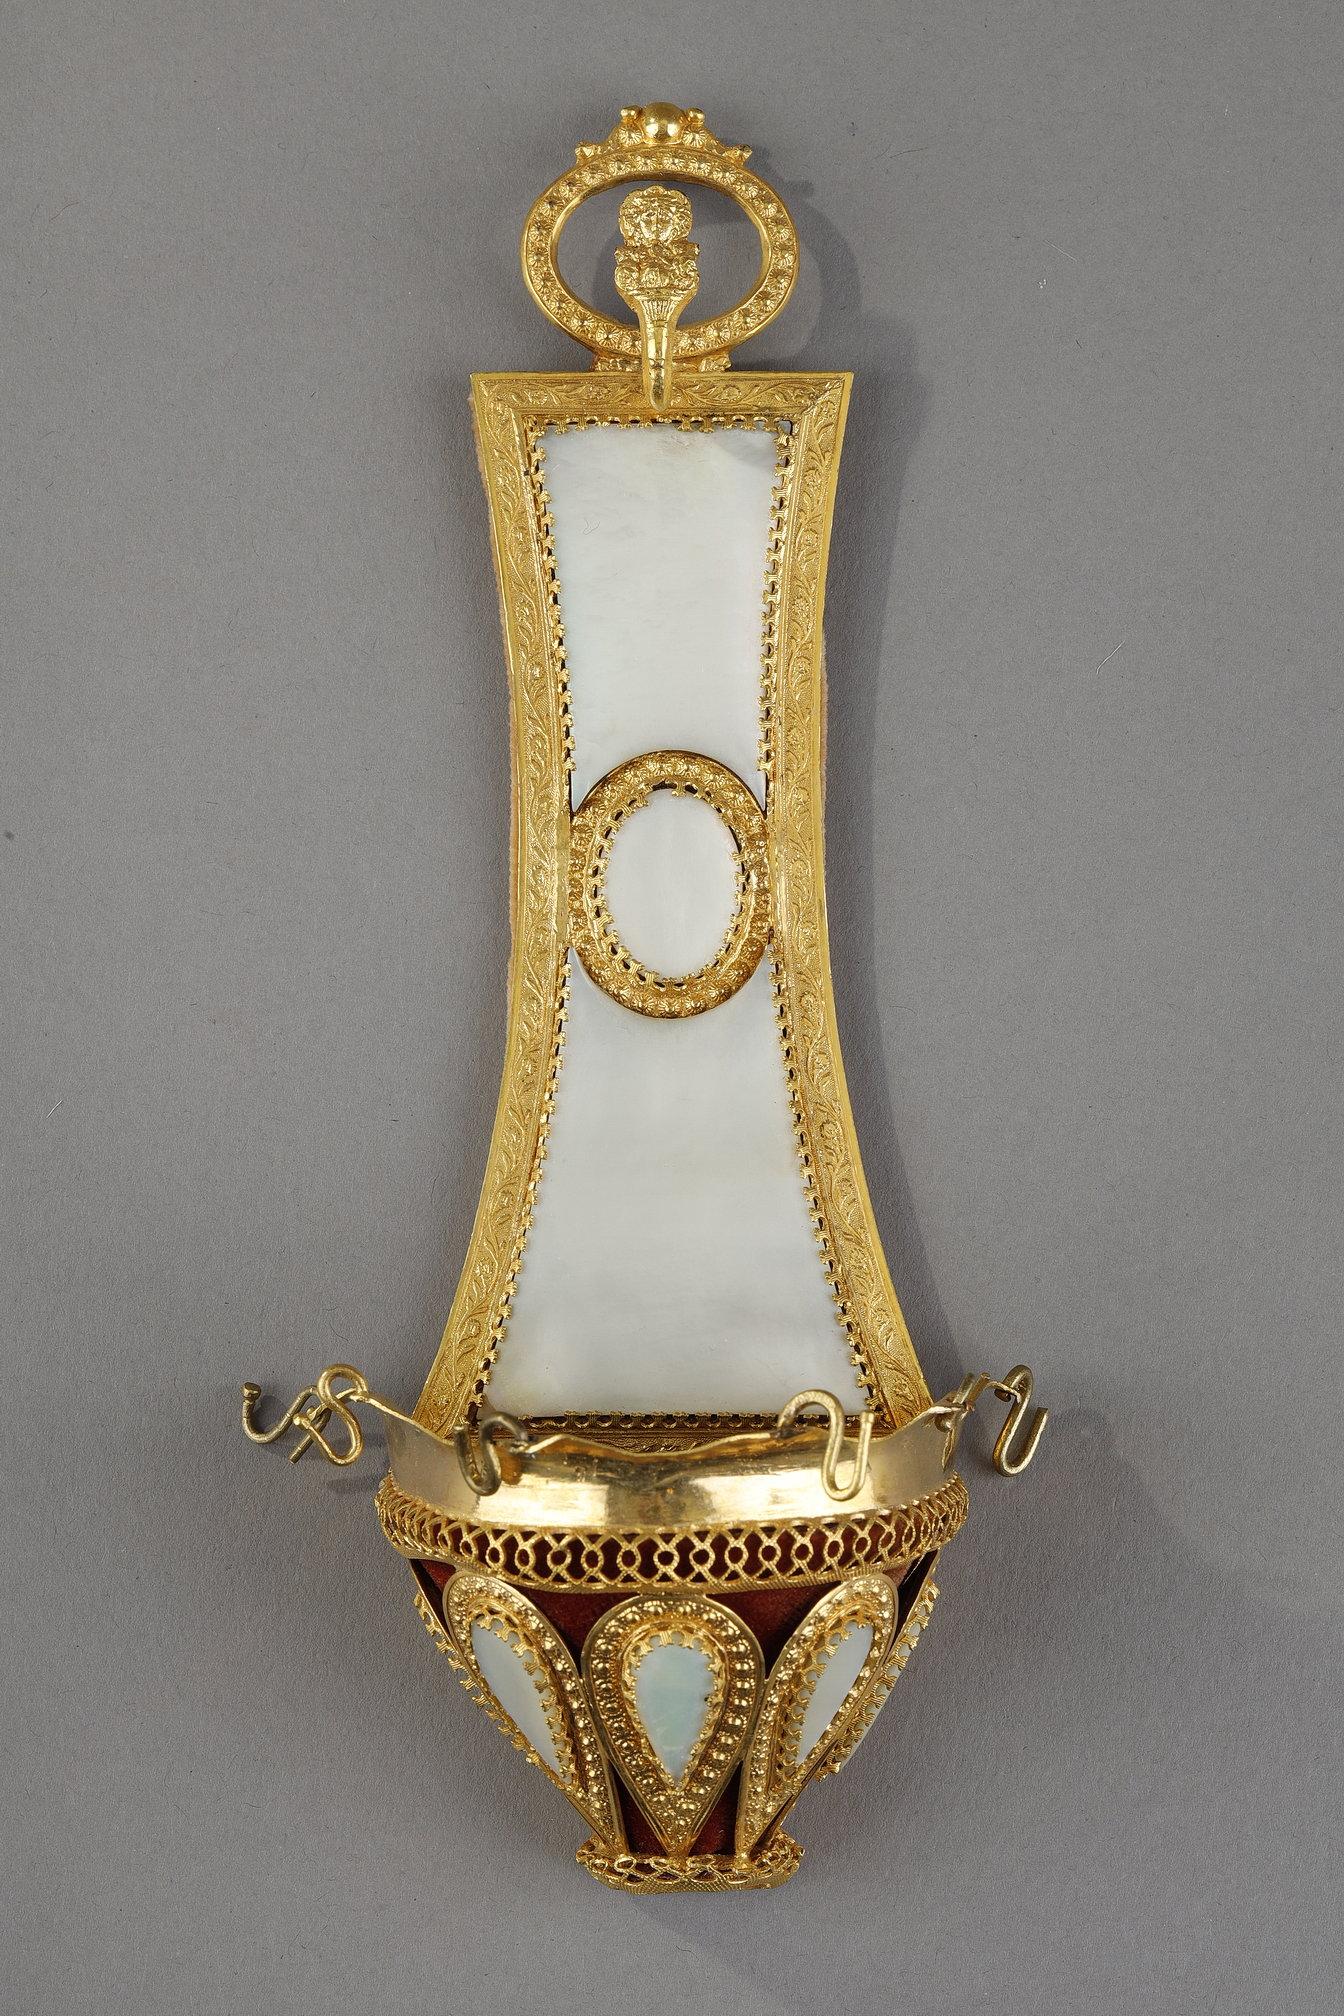 Pair of Charles X ring holders (baguiers) with ormolu mounts embellished with small flowers. A high backing of mother-of-pearl joins a small, ormolu bowl featuring openwork interlacing and teardrop-shaped mother-of-pearl gadroons surrounded by gilt